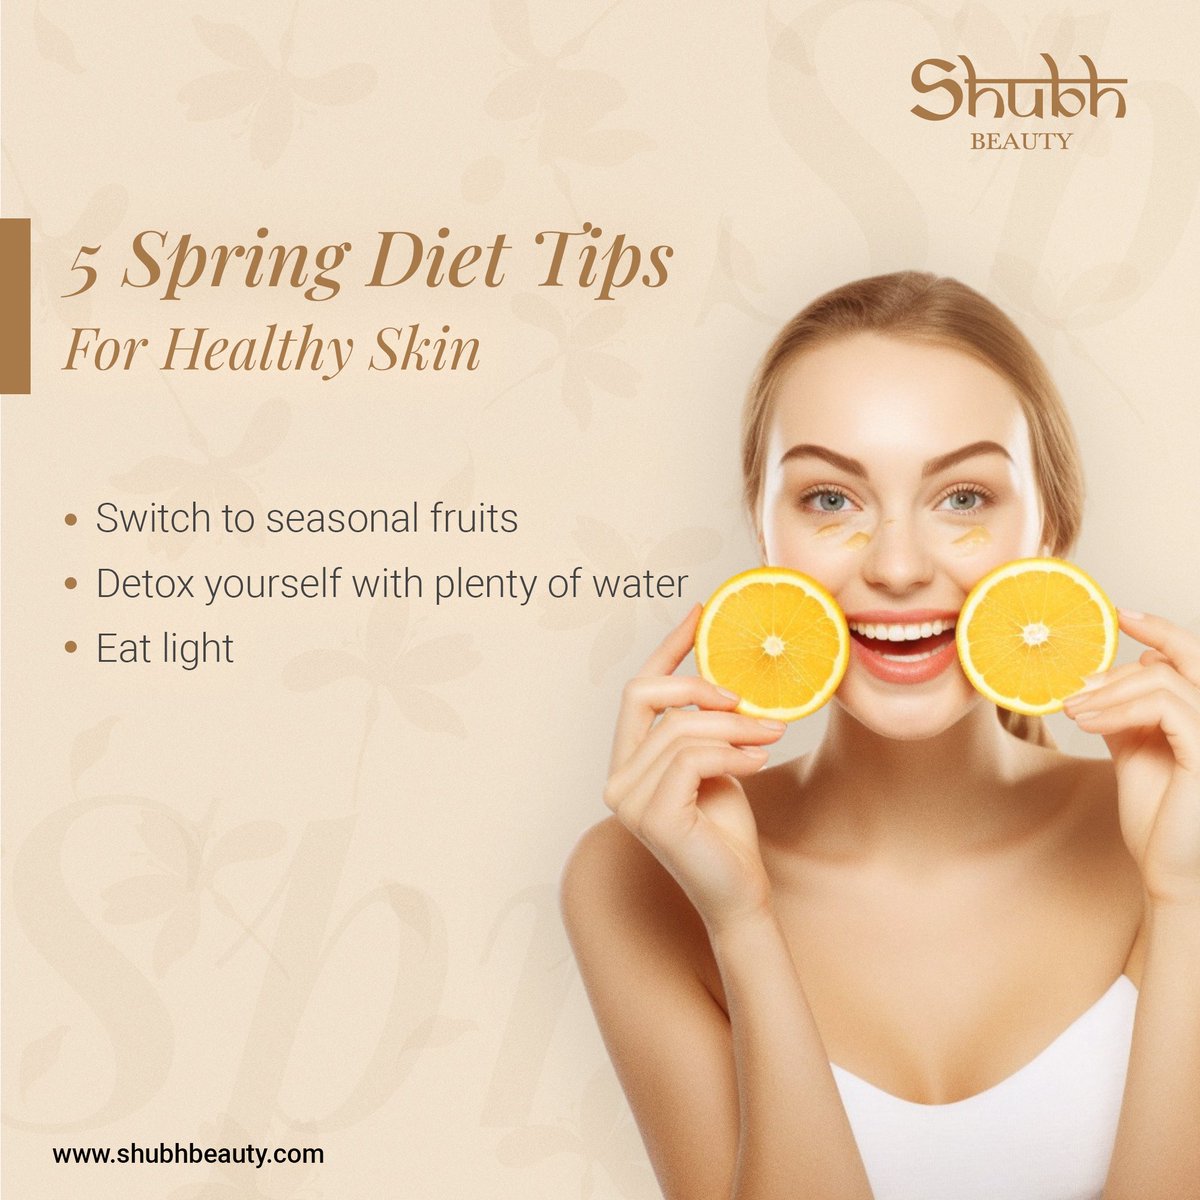 As your skincare routine and diet! Here are some essential tips to ensure your skin stays healthy and glowing this spring.
.
.

#SpringSkinCare #HealthySkinTips #SkinHealth #SpringDiet #HealthyEating #SkinGlow #SpringBeauty #EatFruits #ShubhBeauty